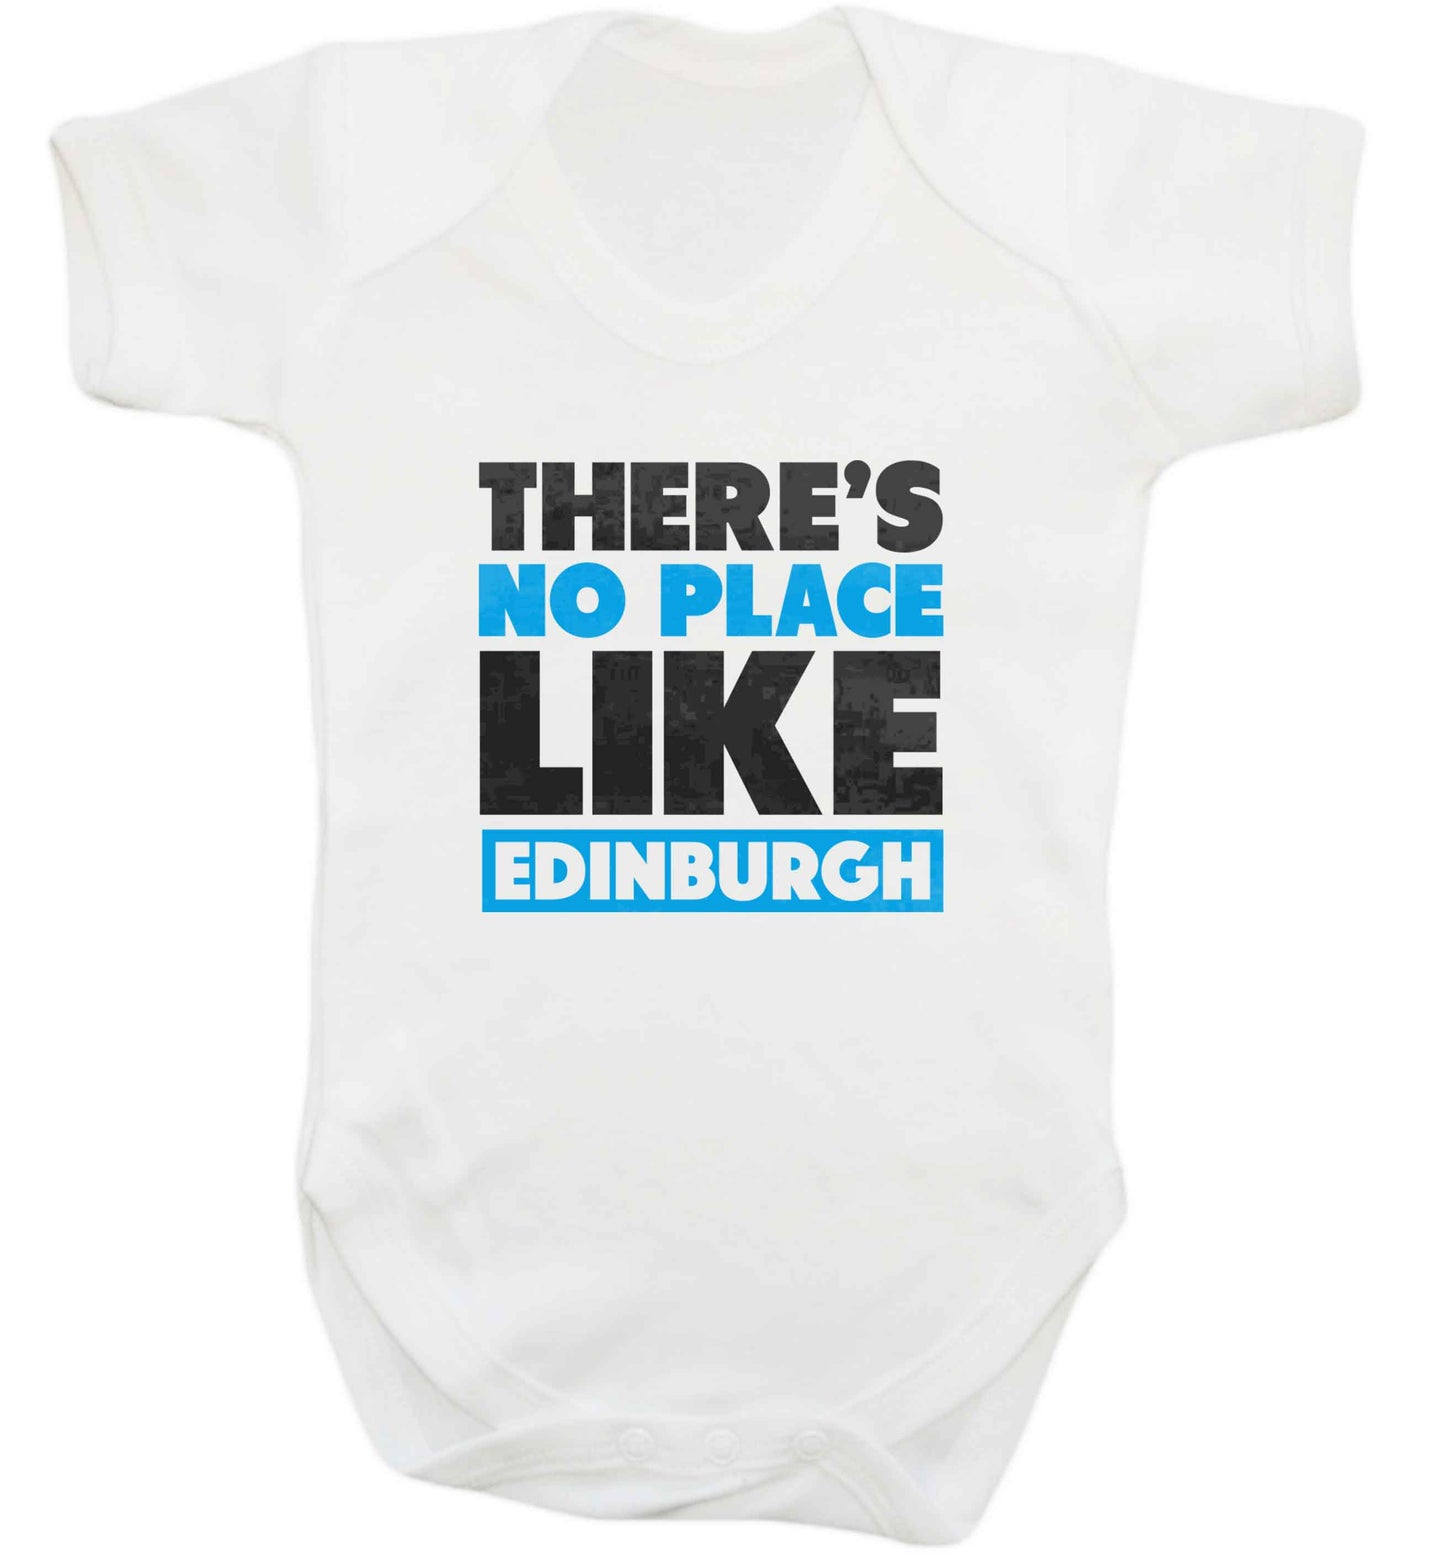 There's no place like Edinburgh baby vest white 18-24 months